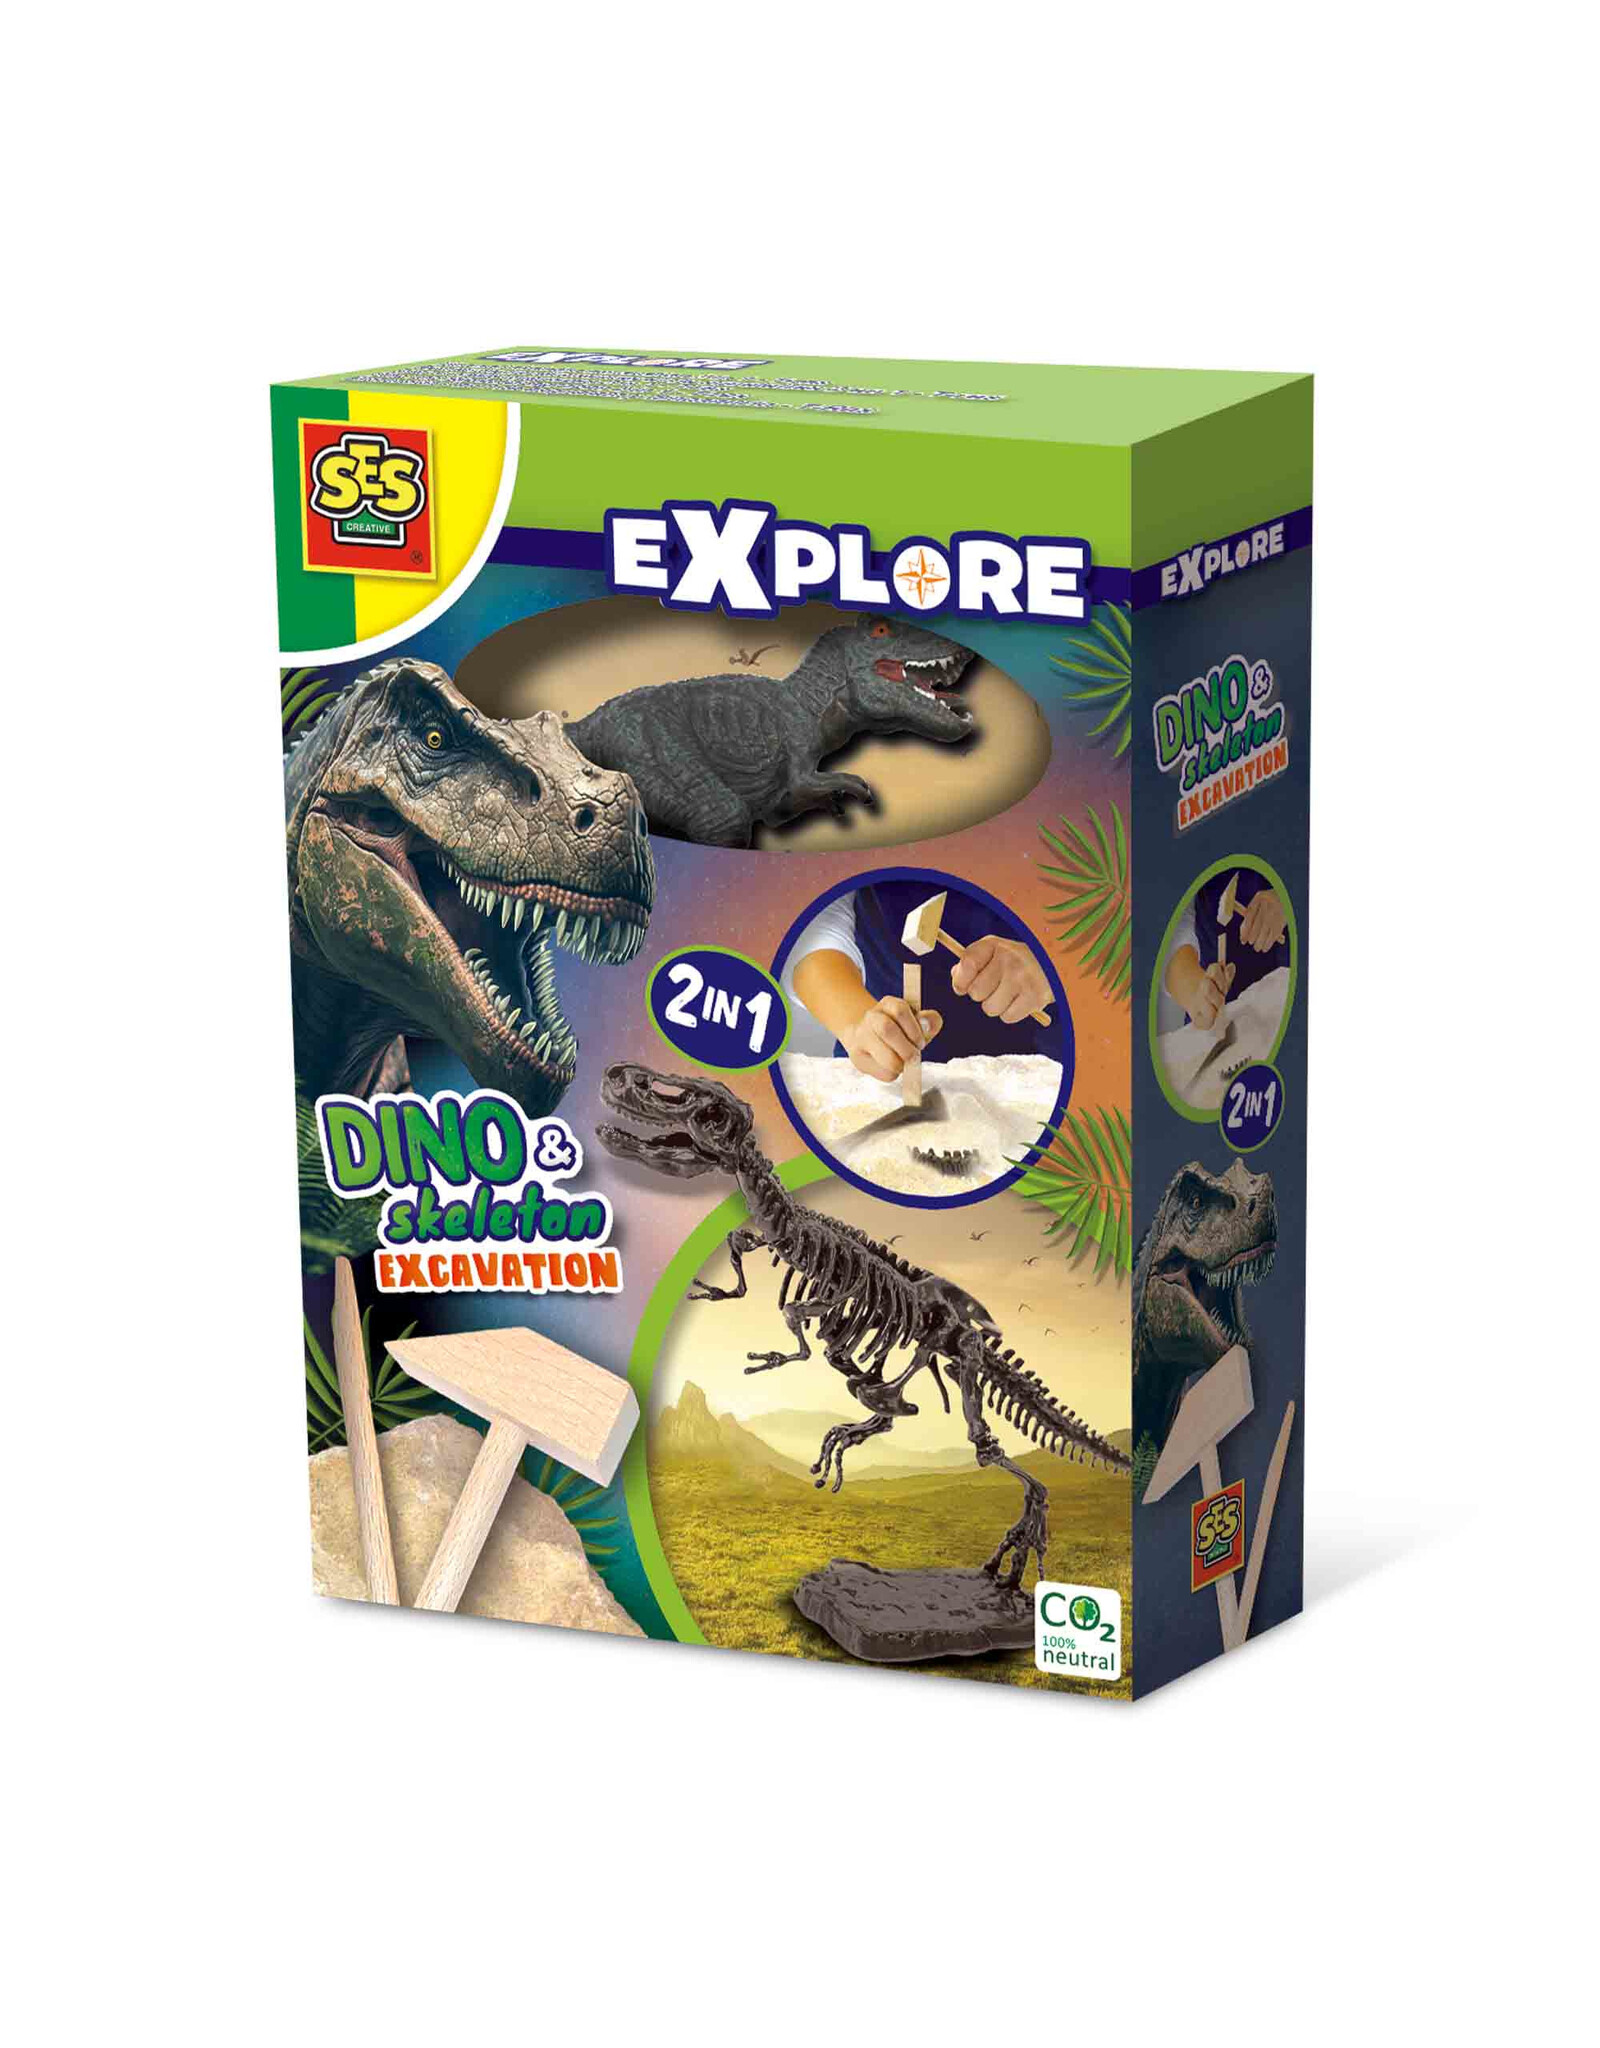 SES Creative SES - Explore - Dino and skeleton excavation 2 in 1 - T-rex